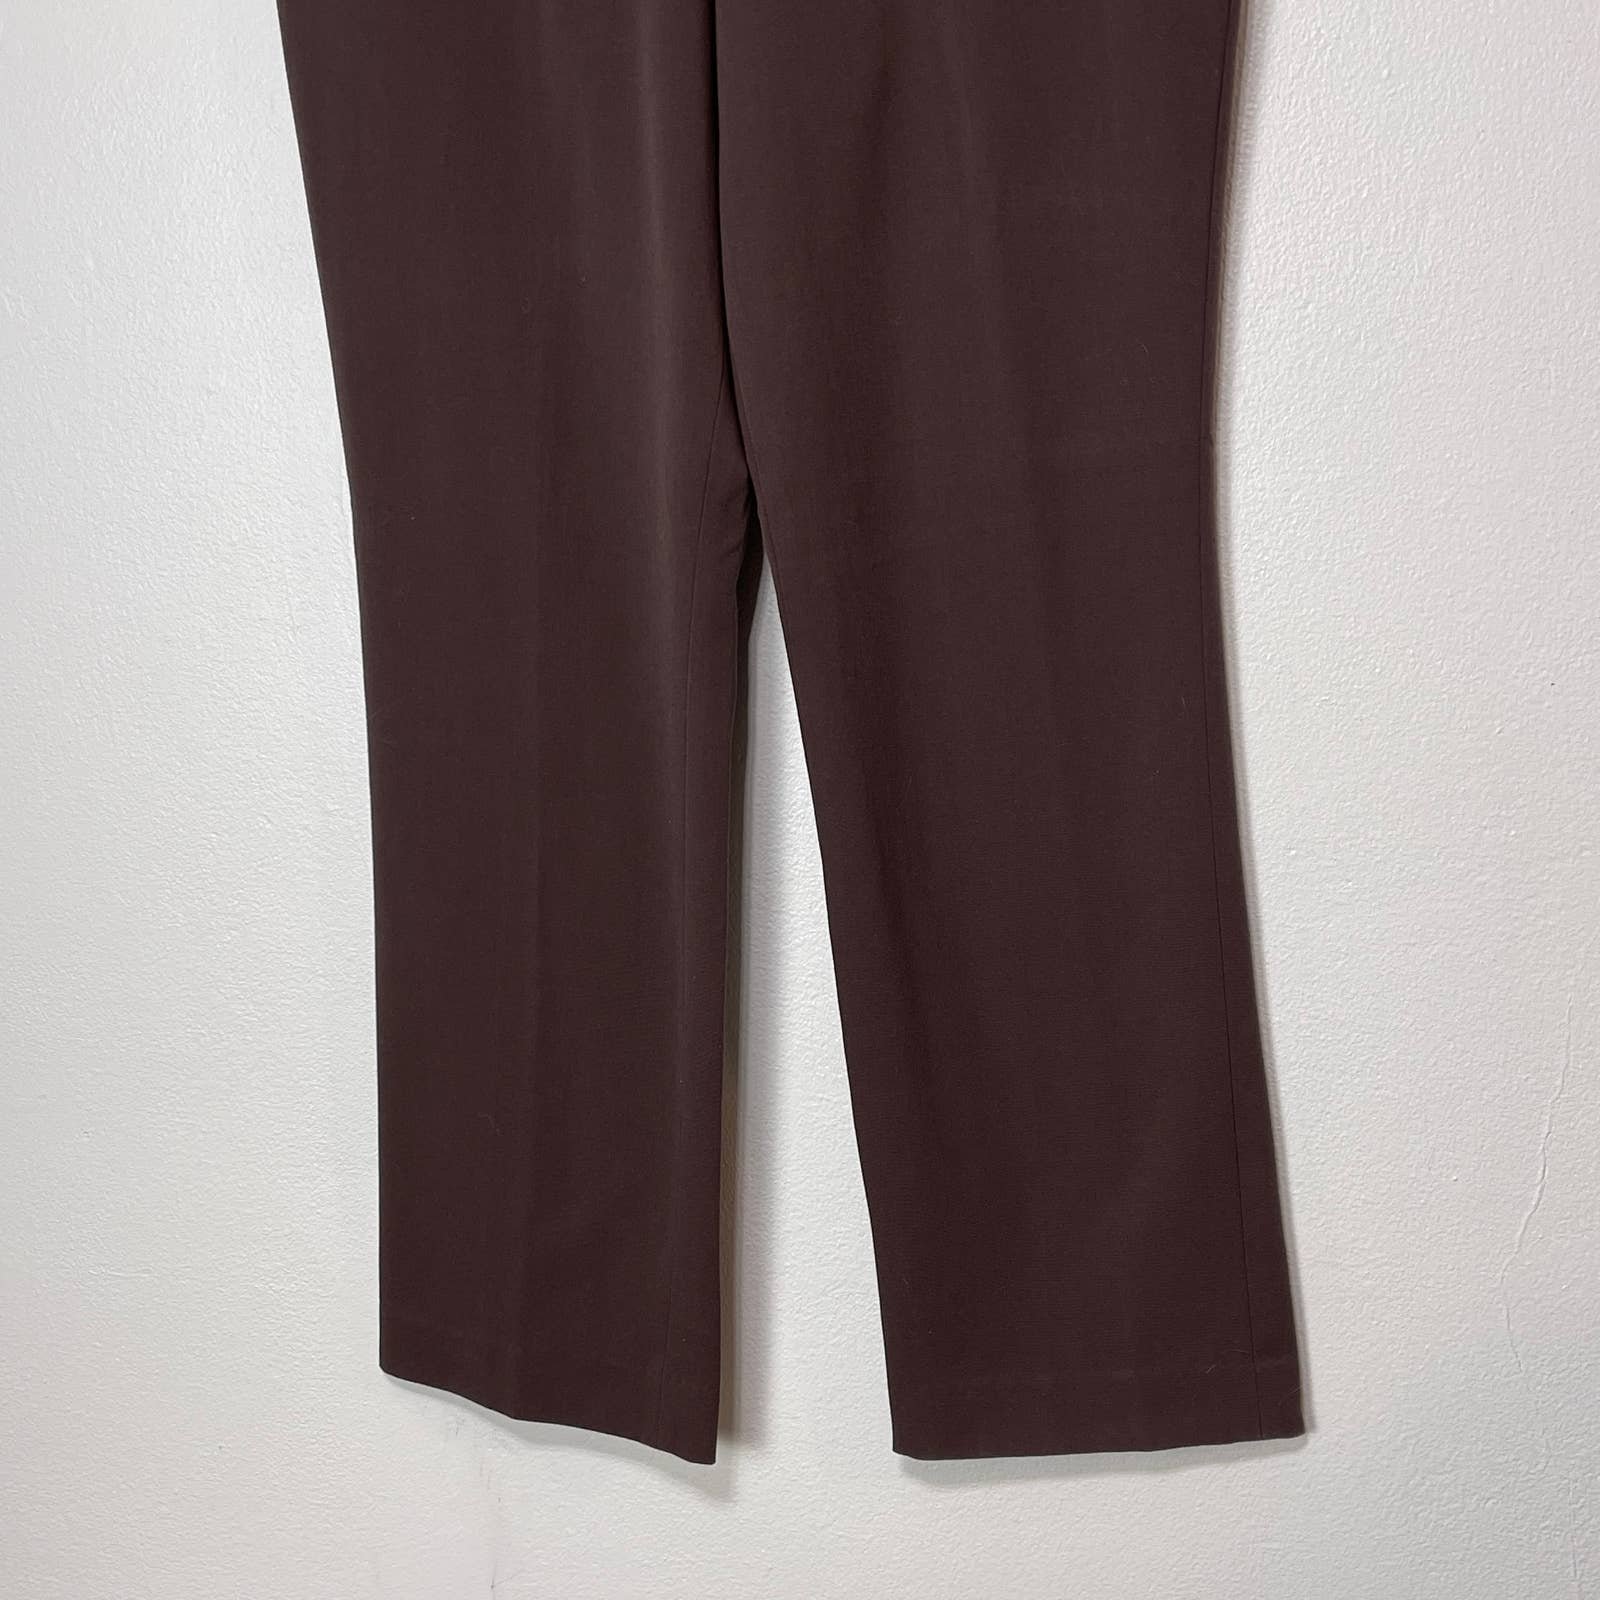 Special offer  Nine West Dress Pants Women´s Size 16 Brown Bootcut Trousers 36x33 Pp406cxzv Cool